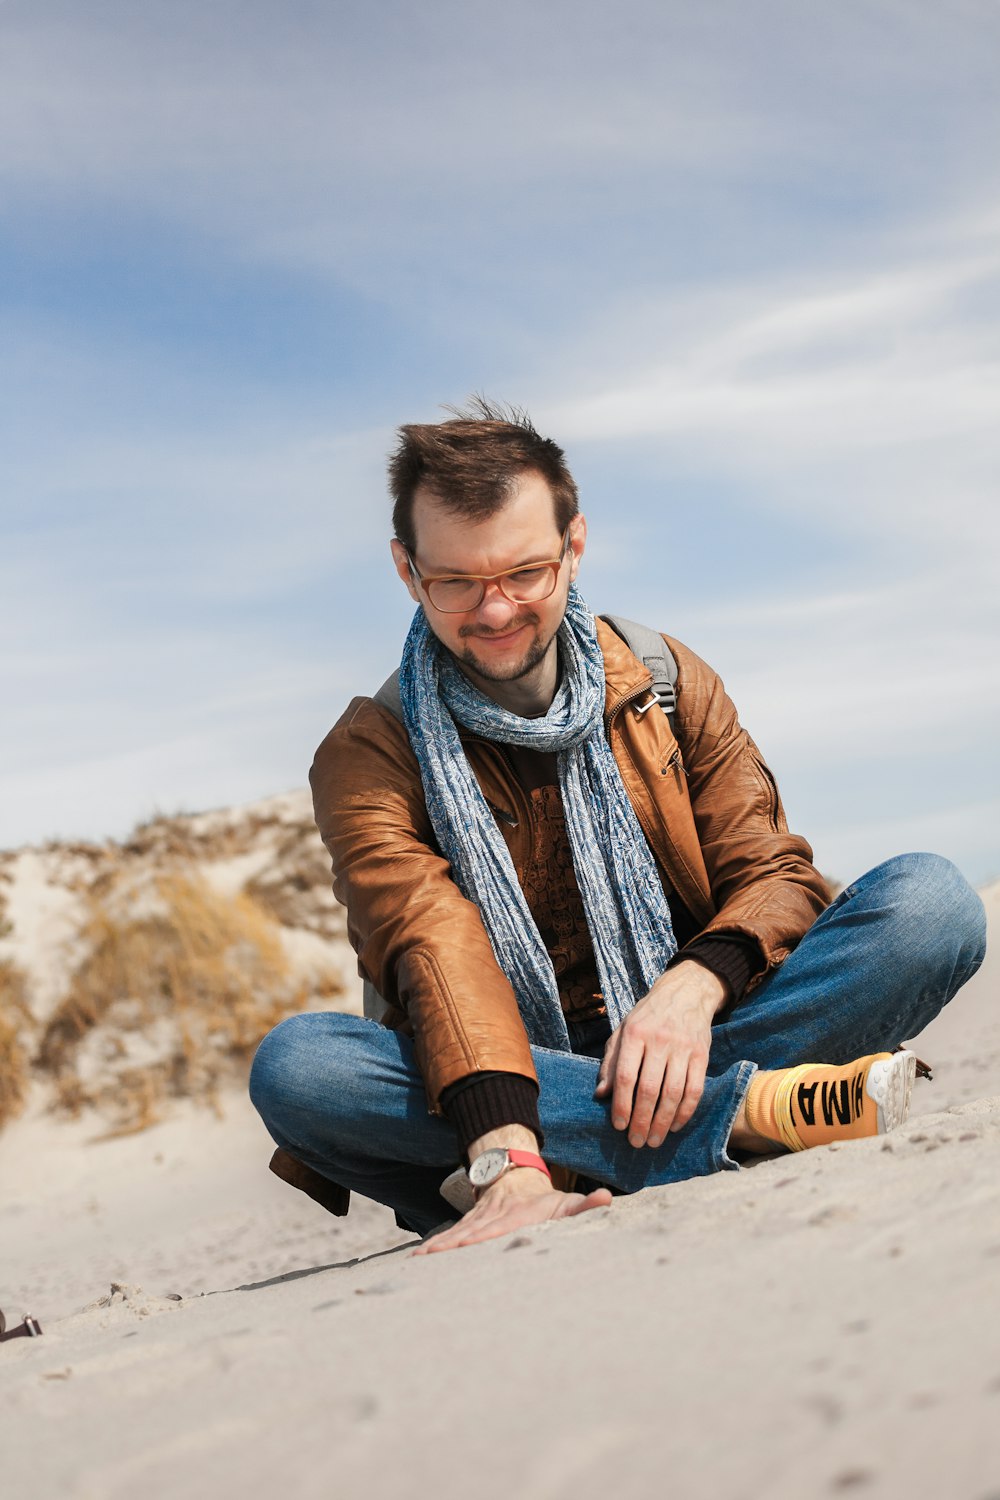 smiling man sitting on ground and touching sand under blue and white skies